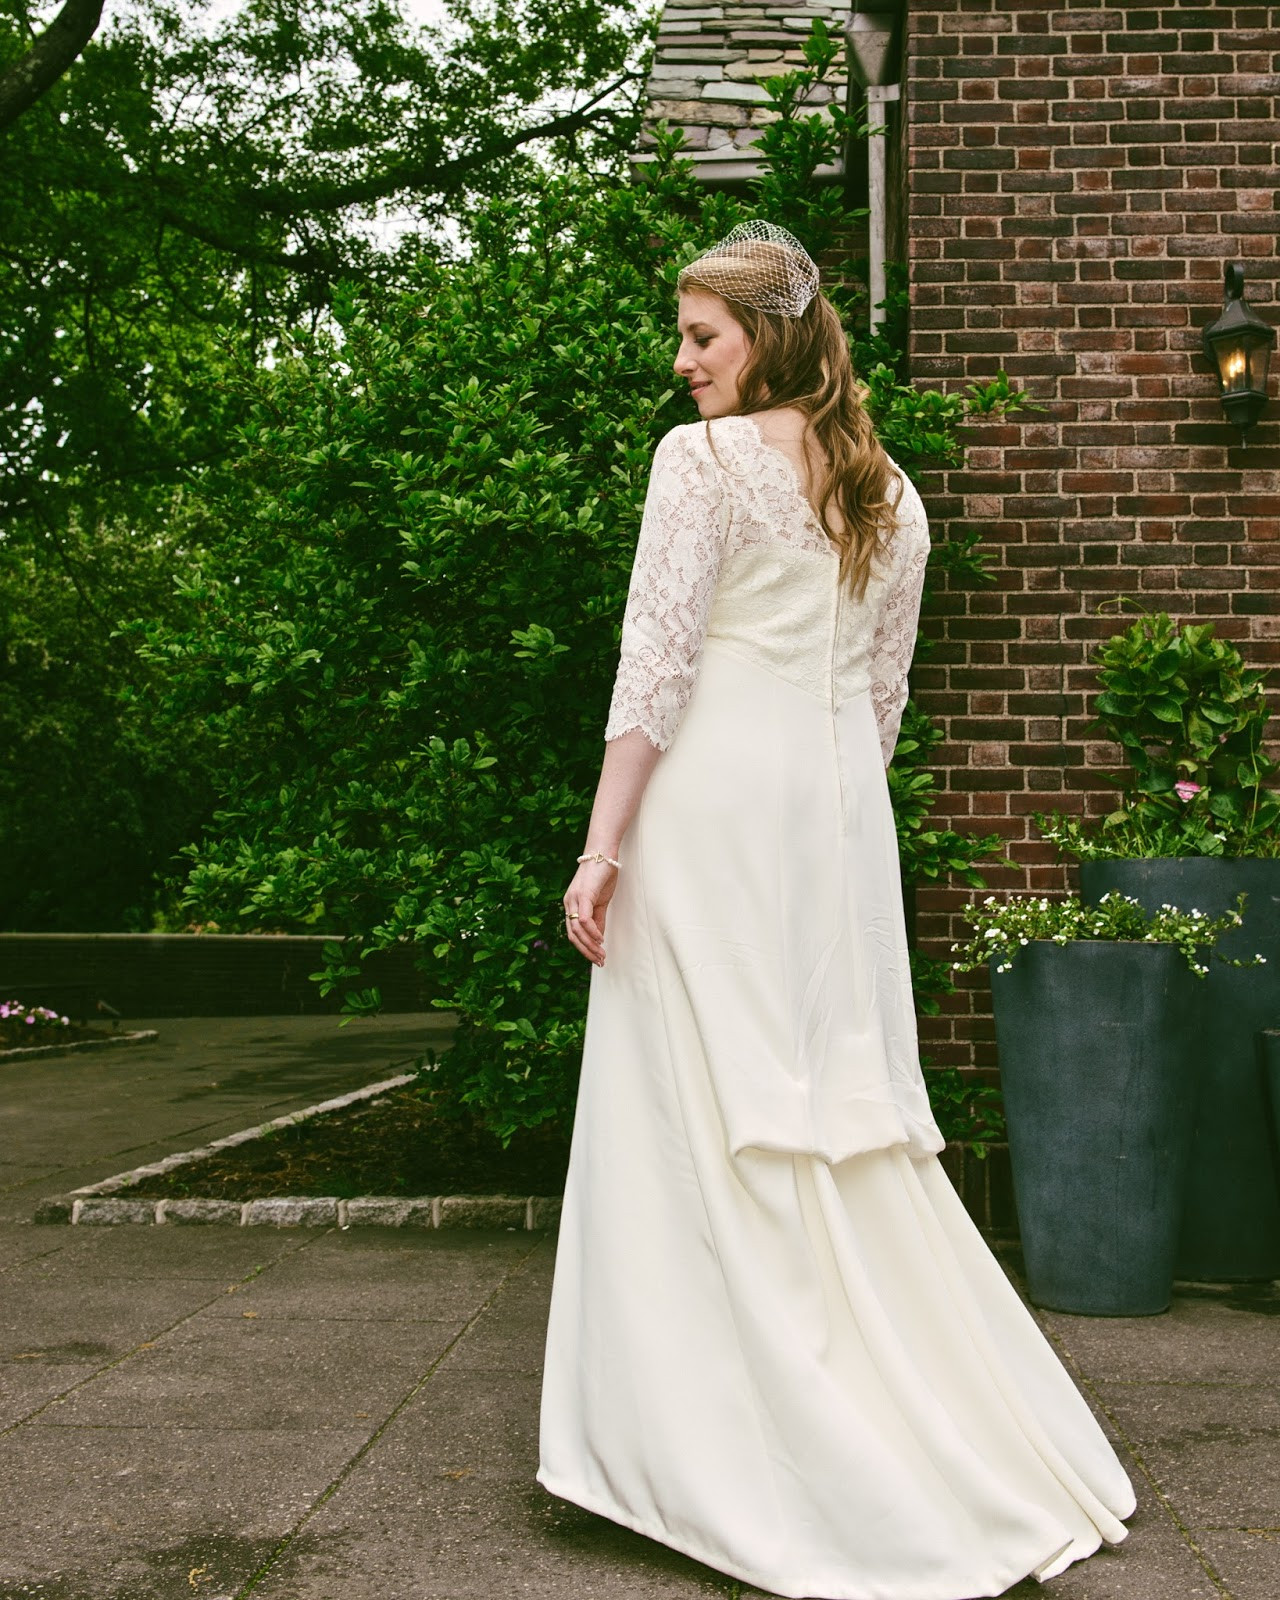 How To Make Your Own Wedding Dress
 Restless Grace 10 Things to Know About Making My Own